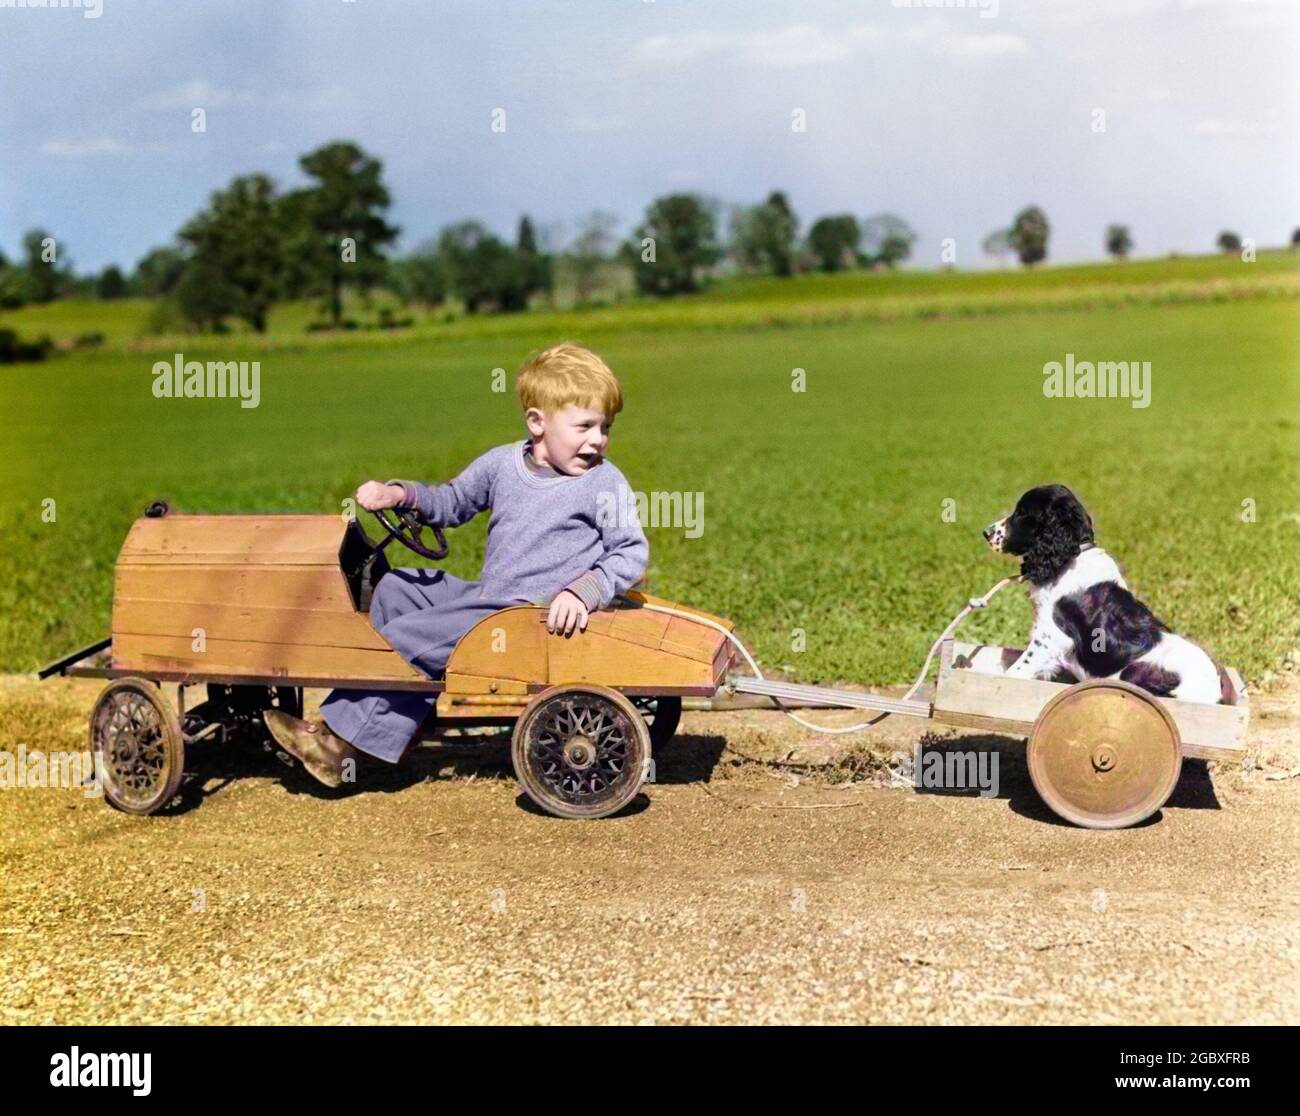 1930s 1940s BOY IN WOODEN TOY CAR PULLING DOG BEHIND IN WAGON - d421c HAR001 HARS 1 WAGON JUVENILE VEHICLE FRIEND BEST SPANIEL LIFESTYLE RURAL COPY SPACE FRIENDSHIP FULL-LENGTH PERSONS AUTOMOBILE MALES WHEELS ROD TRANSPORTATION RELEASES MAMMALS MAN'S BEST FRIEND ADVENTURE AUTOS CANINES LEADERSHIP PAL WAGON WHEELS AUTOMOTIVE MOTORING ZOOLOGY TOWING AUTOMOBILES FRIENDLY SPANIELS WAGON WHEEL WAGONS BEST FRIEND MAN'S MOTORIST ANIMALS DOG ANIMALS DOGS CANINE HOT ROD HOTROD HOTRODS JUVENILES MAMMAL PUP RODS SPRINGIER SPRINGIER SPANIEL SPRINGIER SPANIELS TOGETHERNESS YOUNGSTER BUDDY Stock Photo